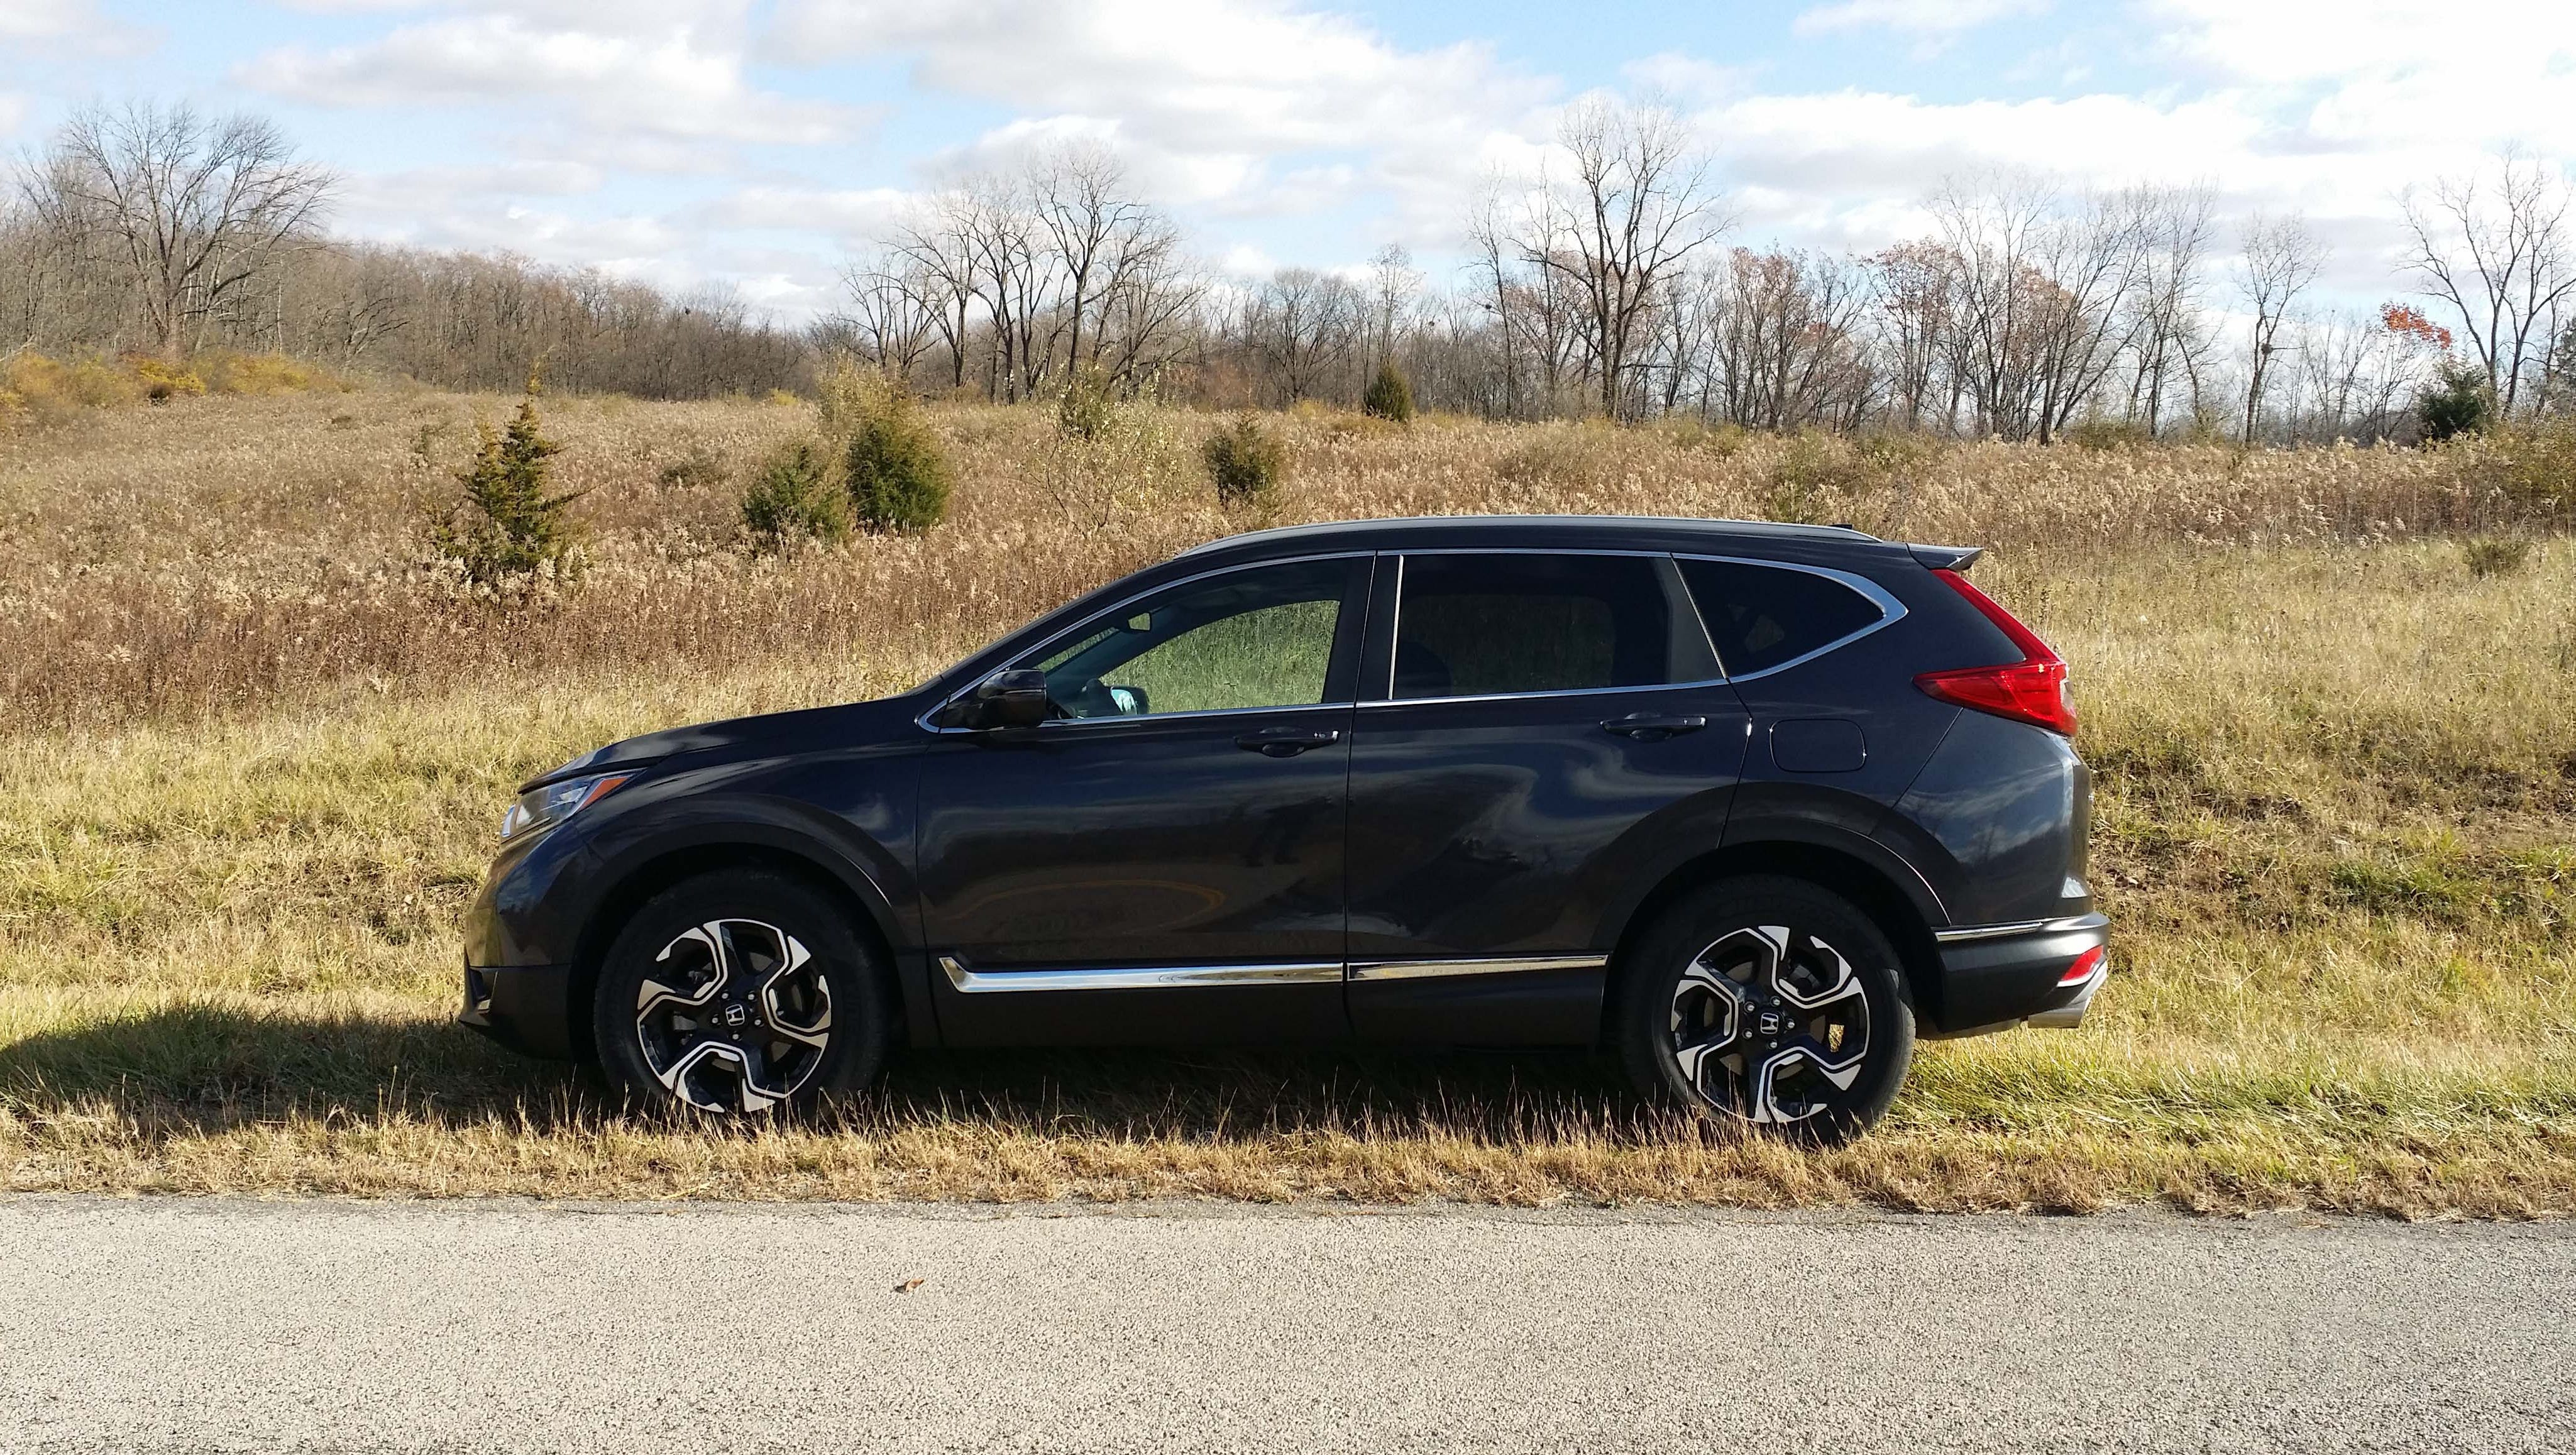 The 2017 Honda CR-V produced in East Liberty, Ohio get s a longer wheelbase, which helps add 2.1 inches of rear legroom.